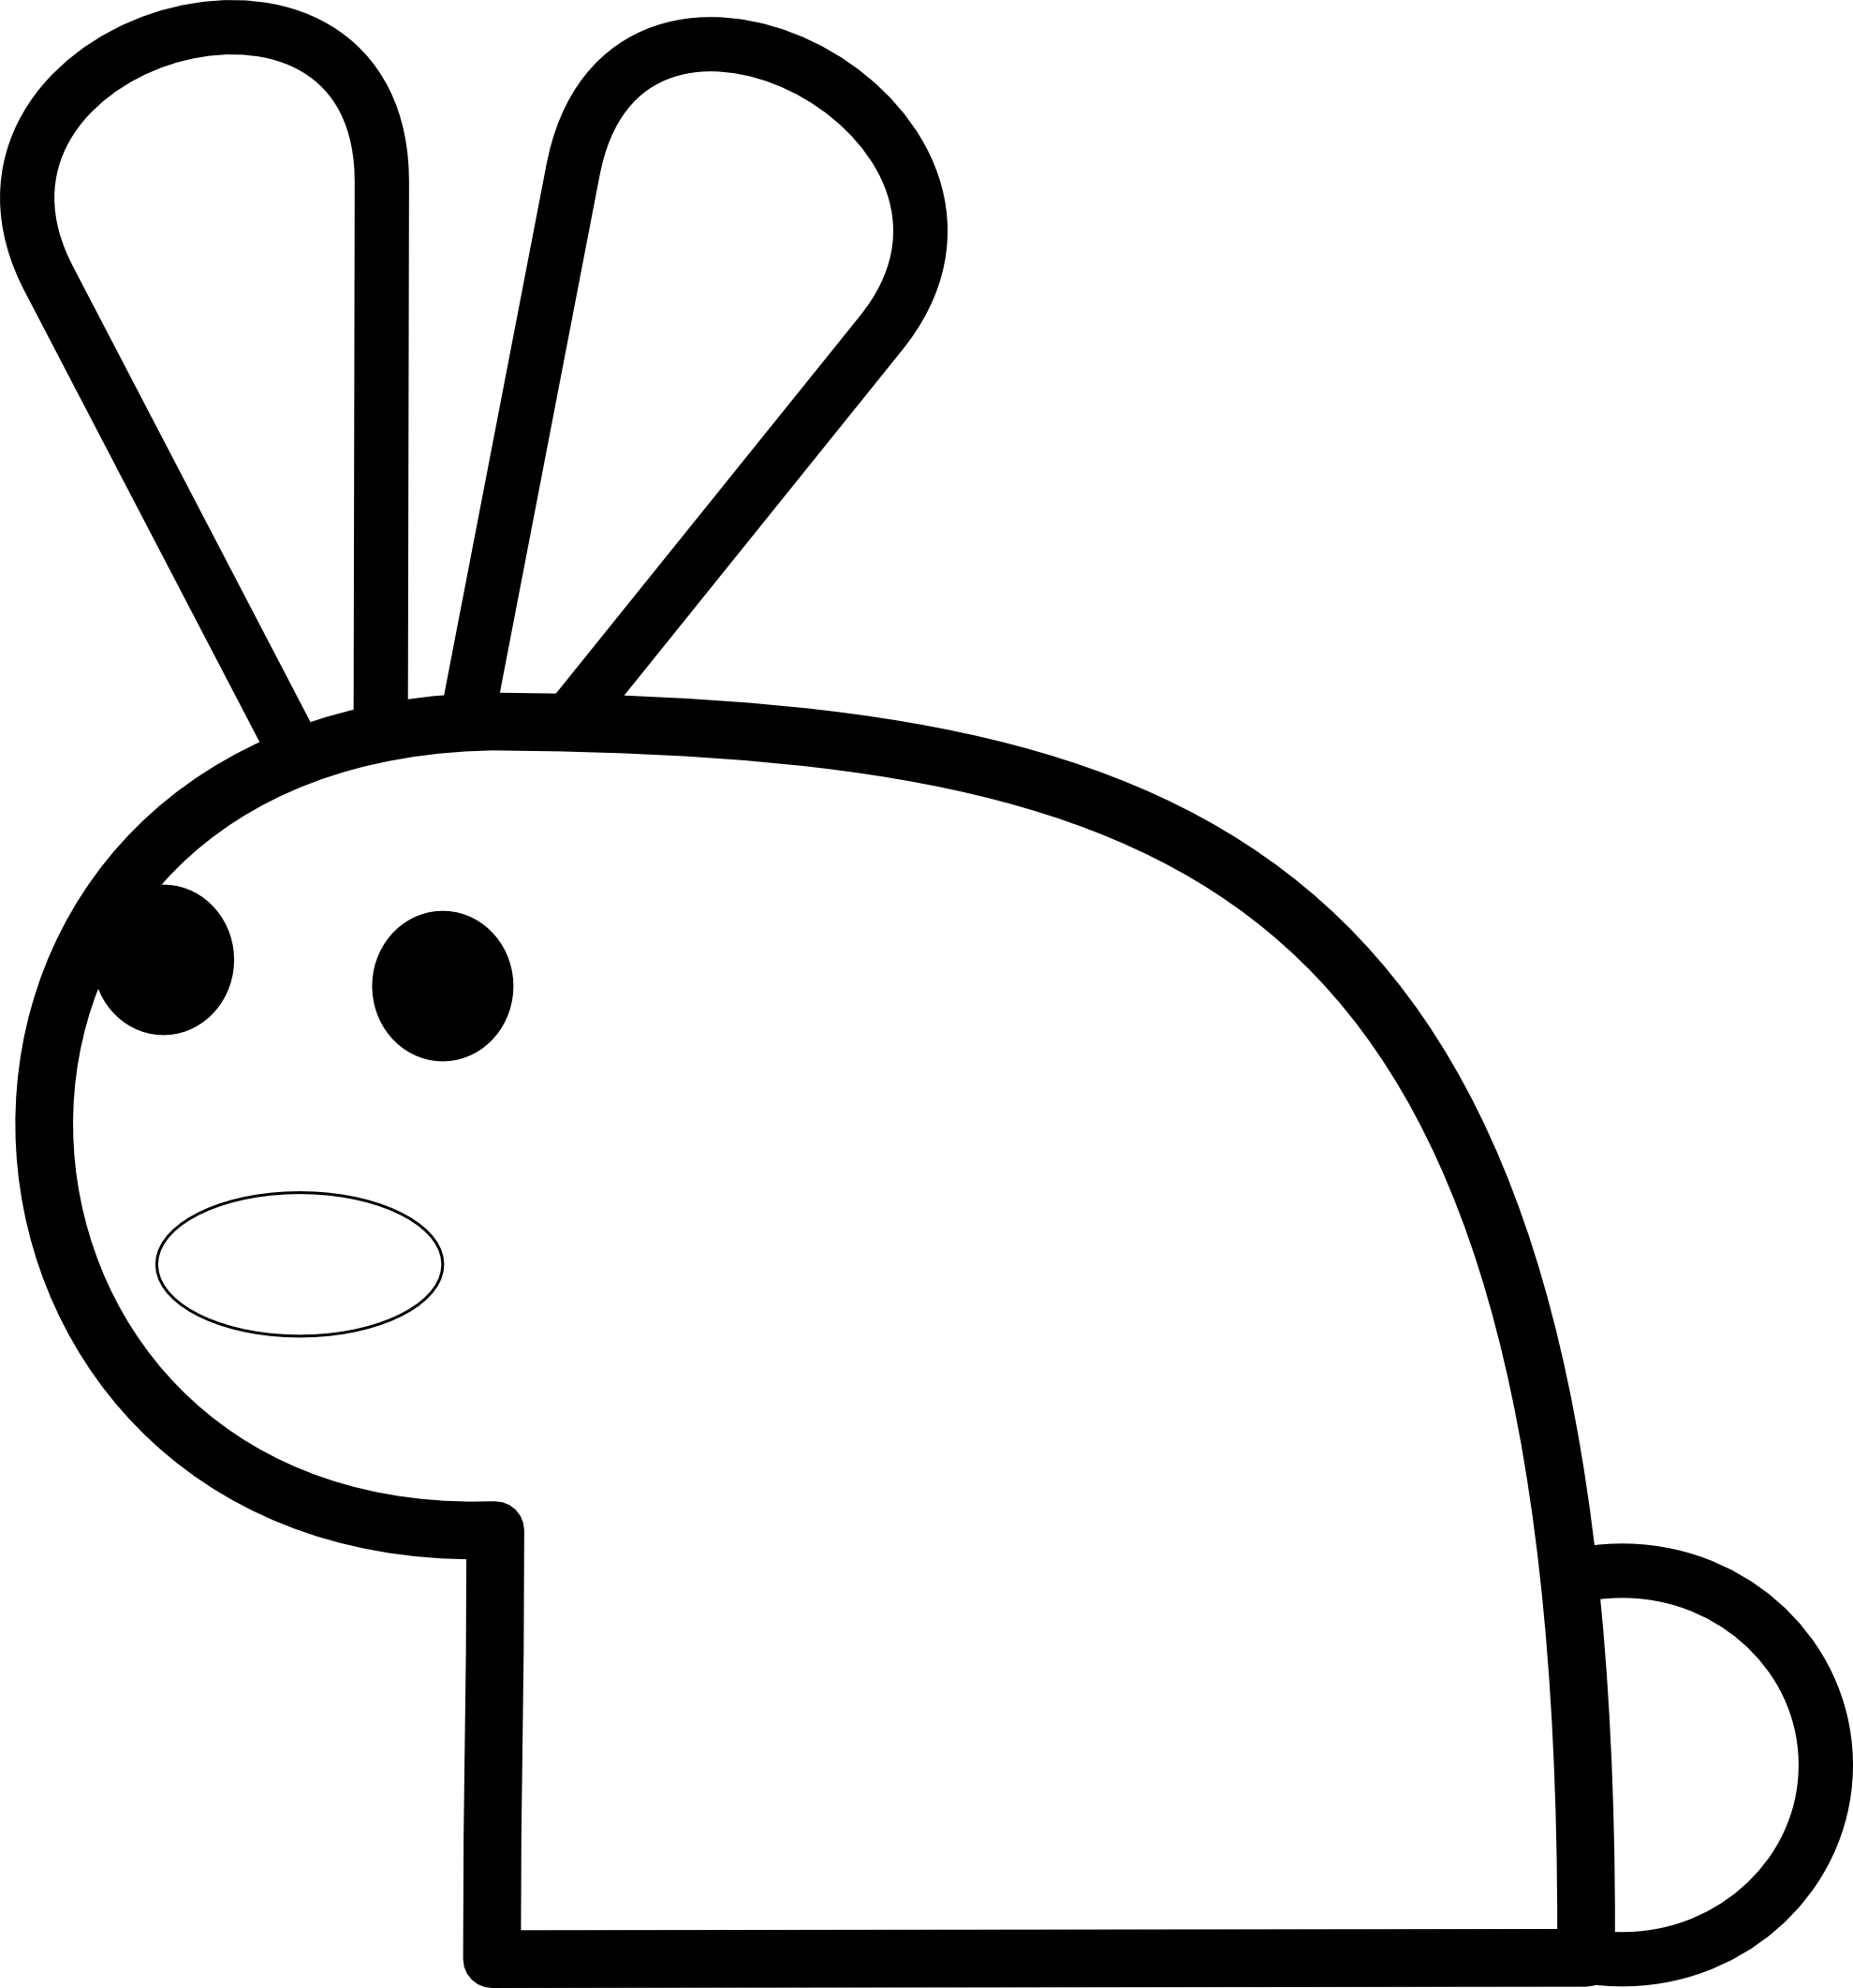 Bunny  black and white bunny clipart black and white free images 7